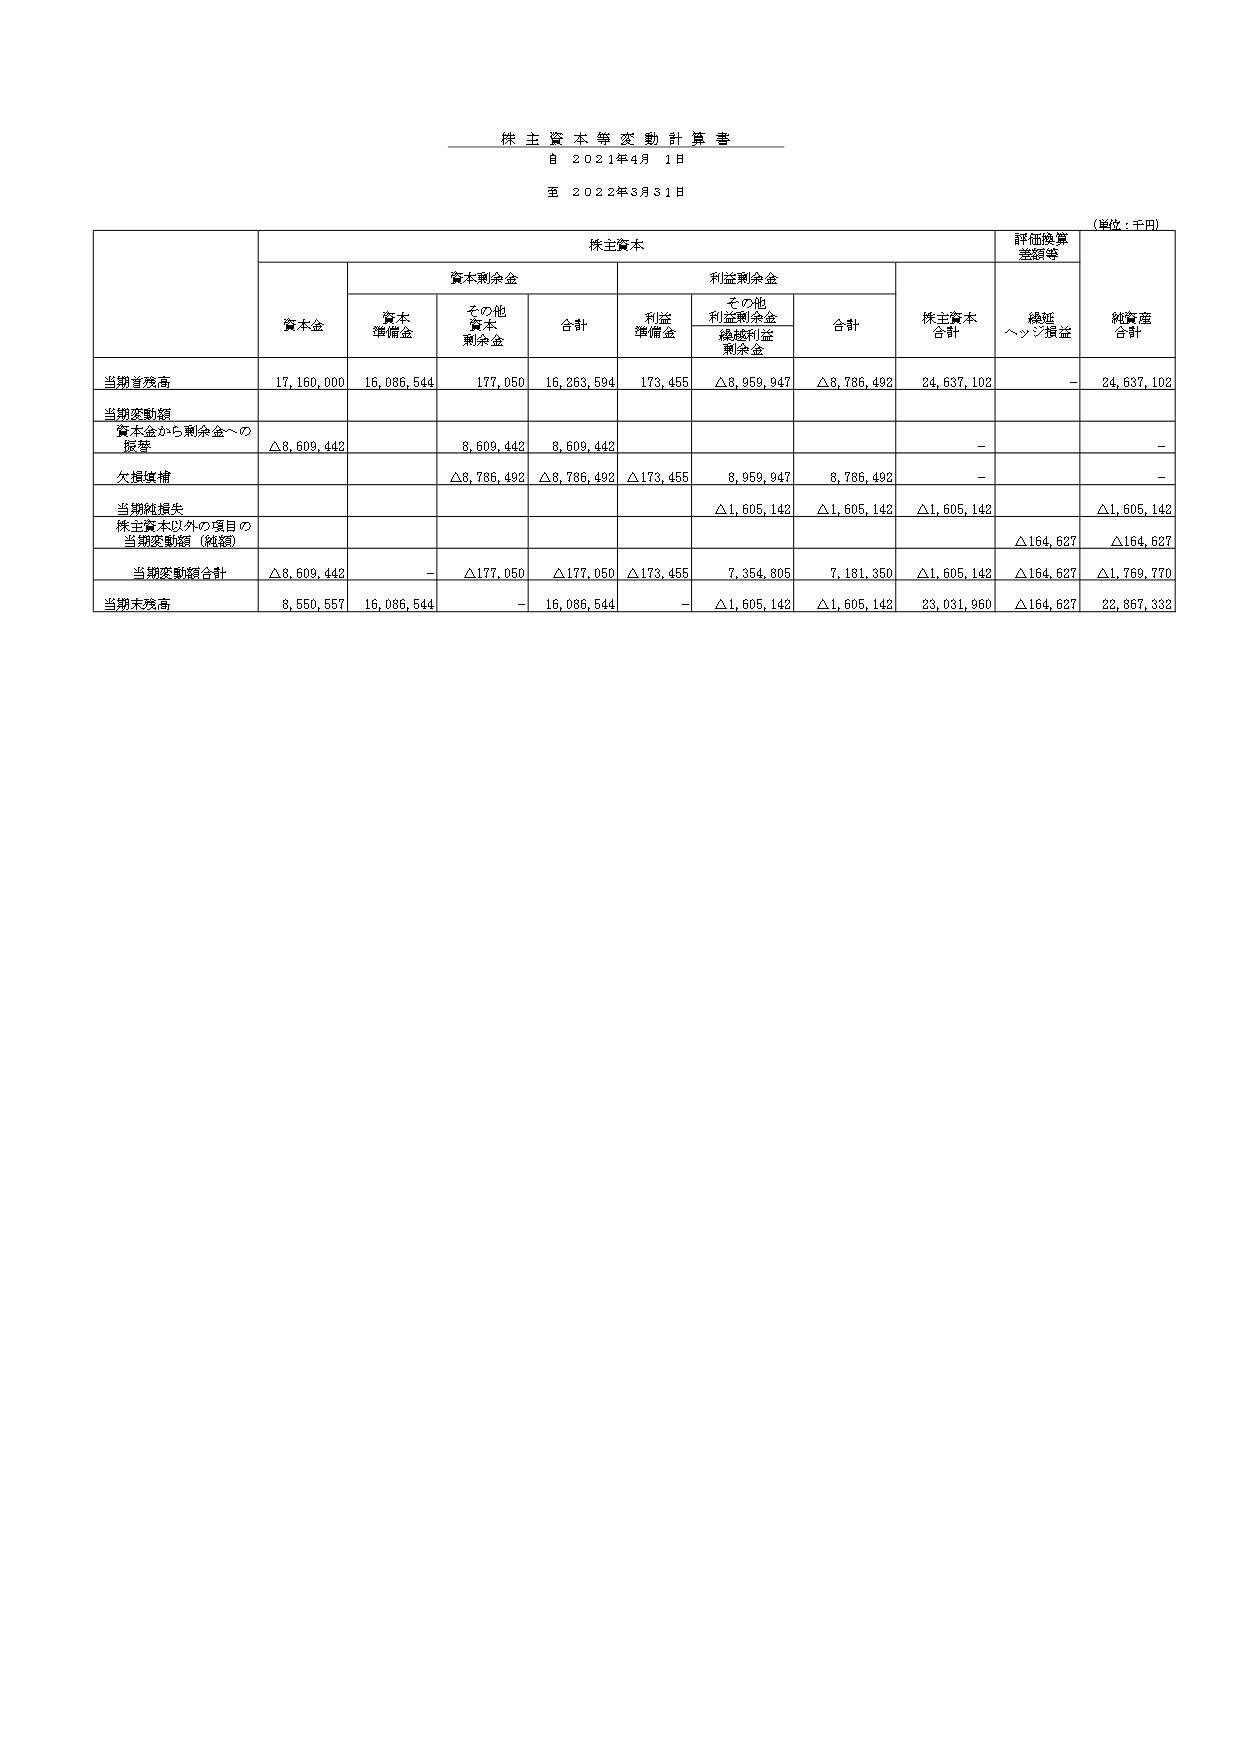 Period 83 Financial Statement (for fiscal year ended March 2022) page 3